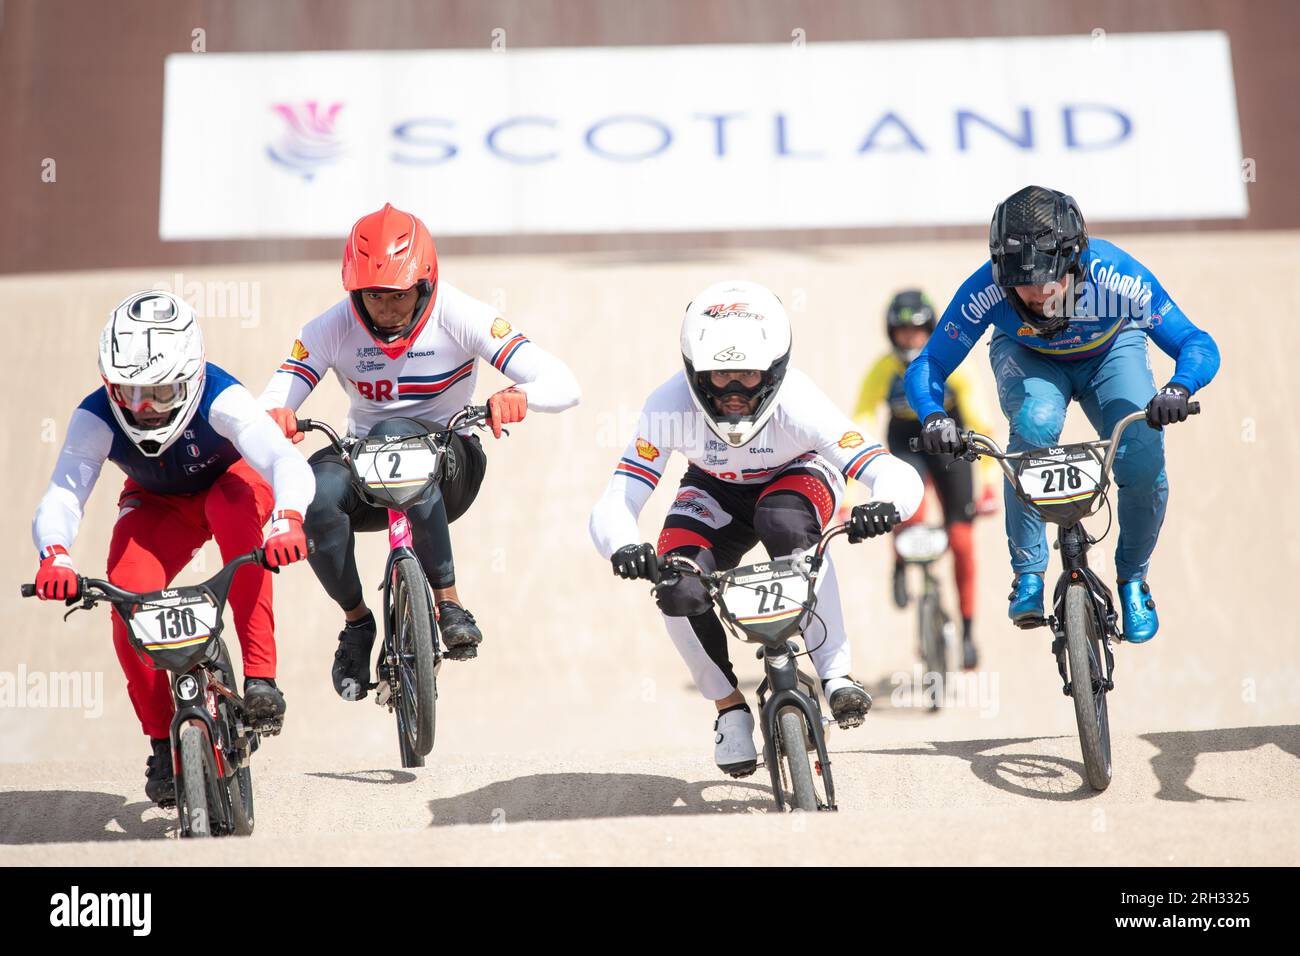 Glasgow BMX Centre, Glasgow, Scotland, UK. 13th Aug, 2023. UCI Cycling World Championships BMX Racing Men's Elite - a clean sweep for France with Romain Mahieu taking gold, Arthur Pilard silver and Joris Daudet bronze. GB's Cullen Ross finished in 6th position. Pictured: GBs Kye Whyte (centre) was eliminated DNF at the semi final stage Pictured: Kye Whye (2) and Cullen Ross (22) racing in the semi final Credit: Kay Roxby/Alamy Live News Stock Photo